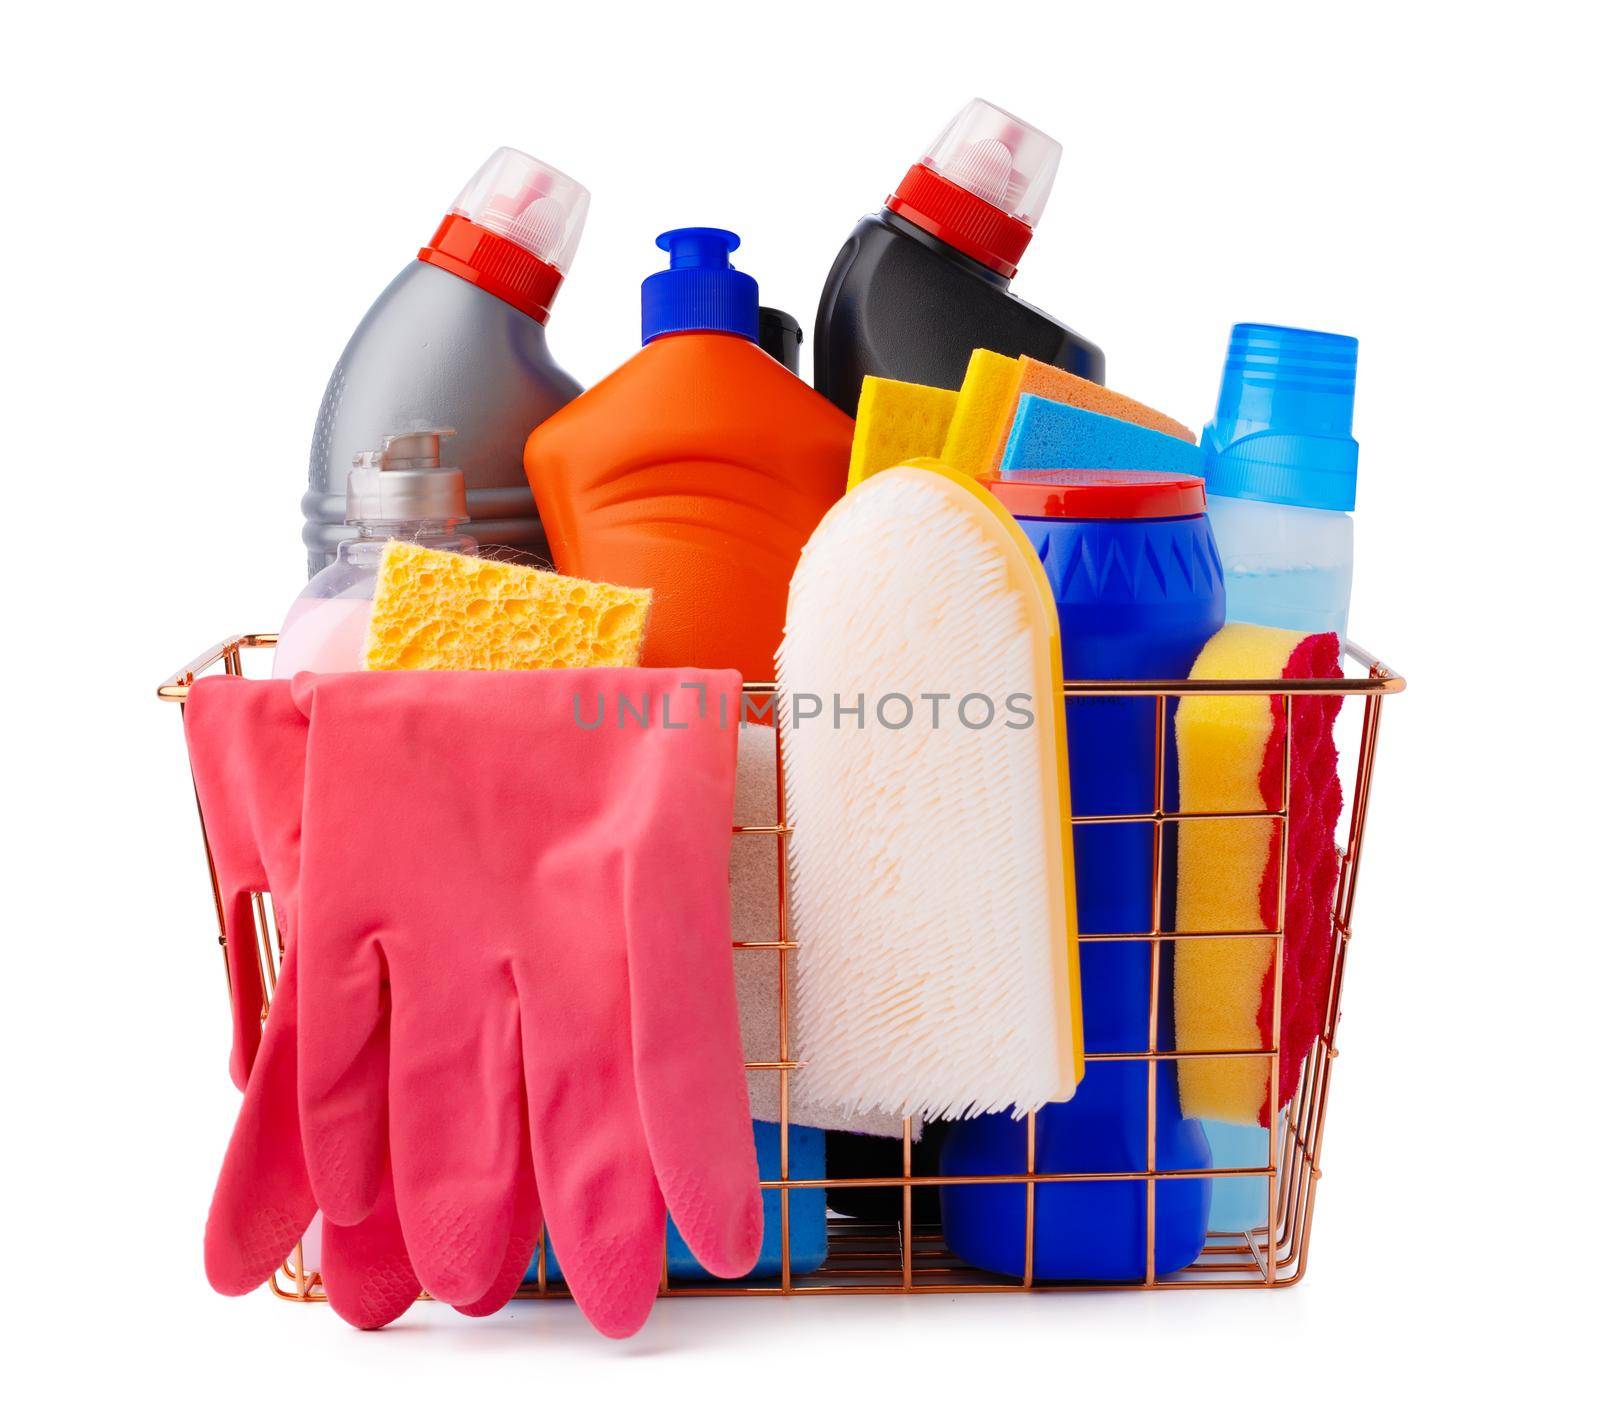 Cleaning items in basket isolated on white background, close up